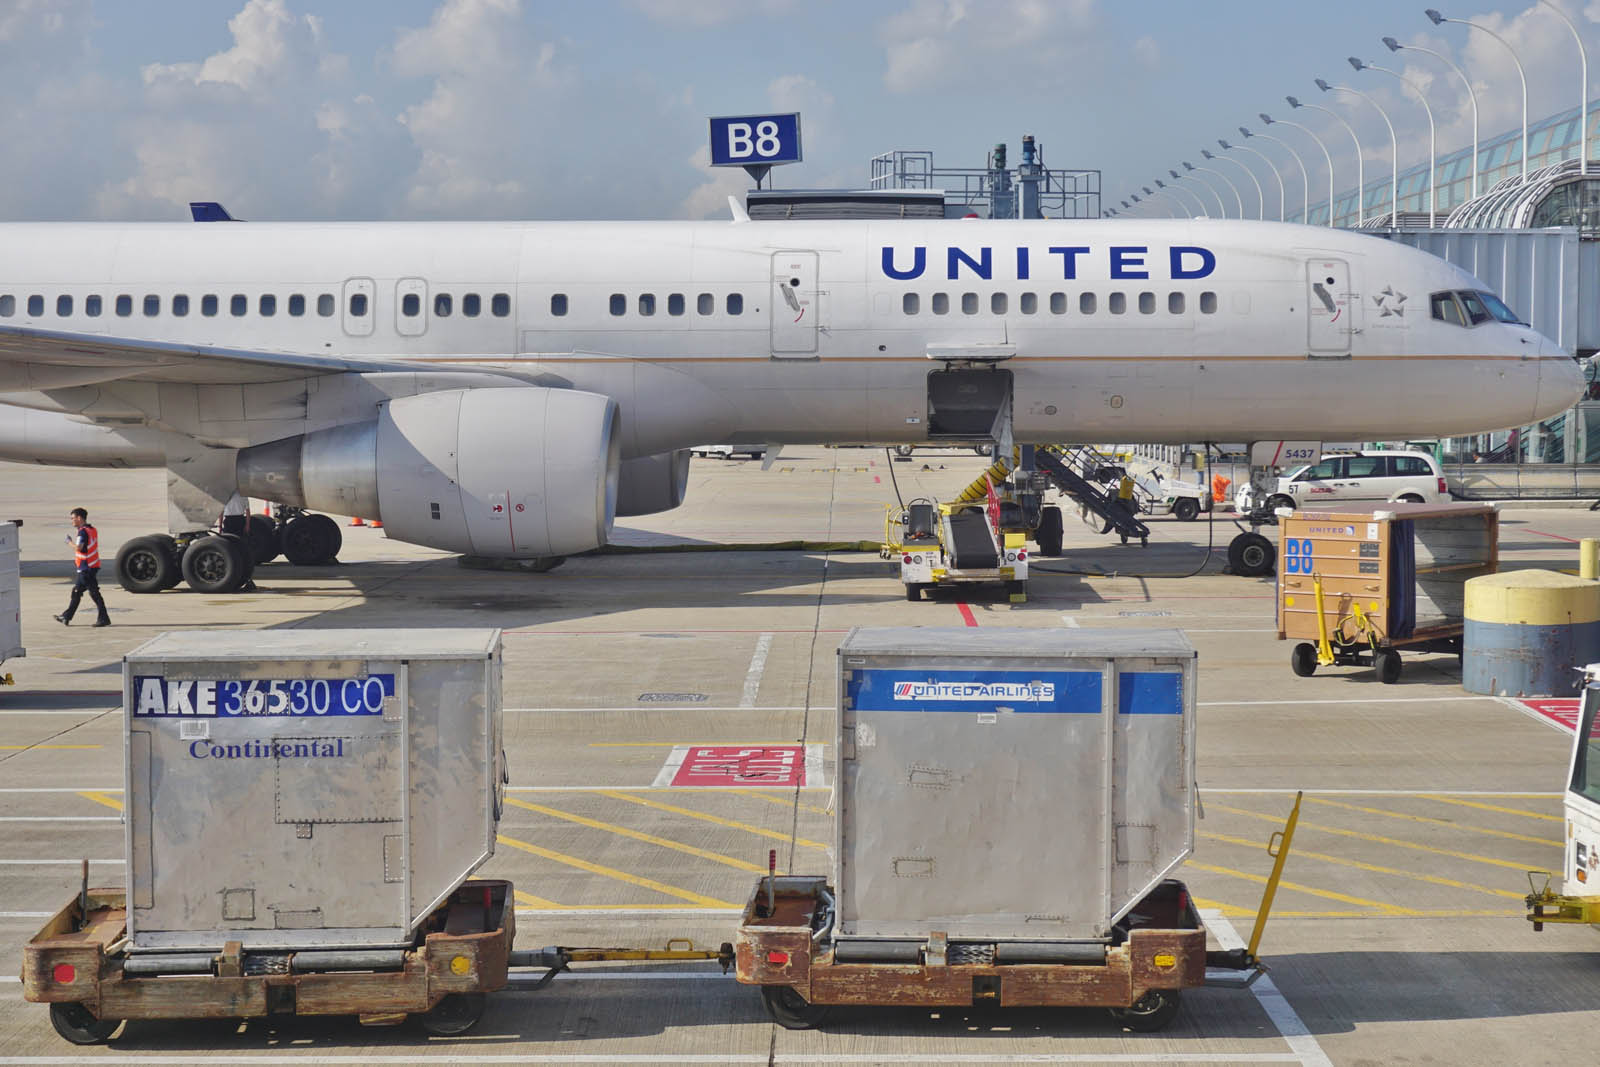 A United Airlines plane sits on the tarmac with baggage containers in the foreground